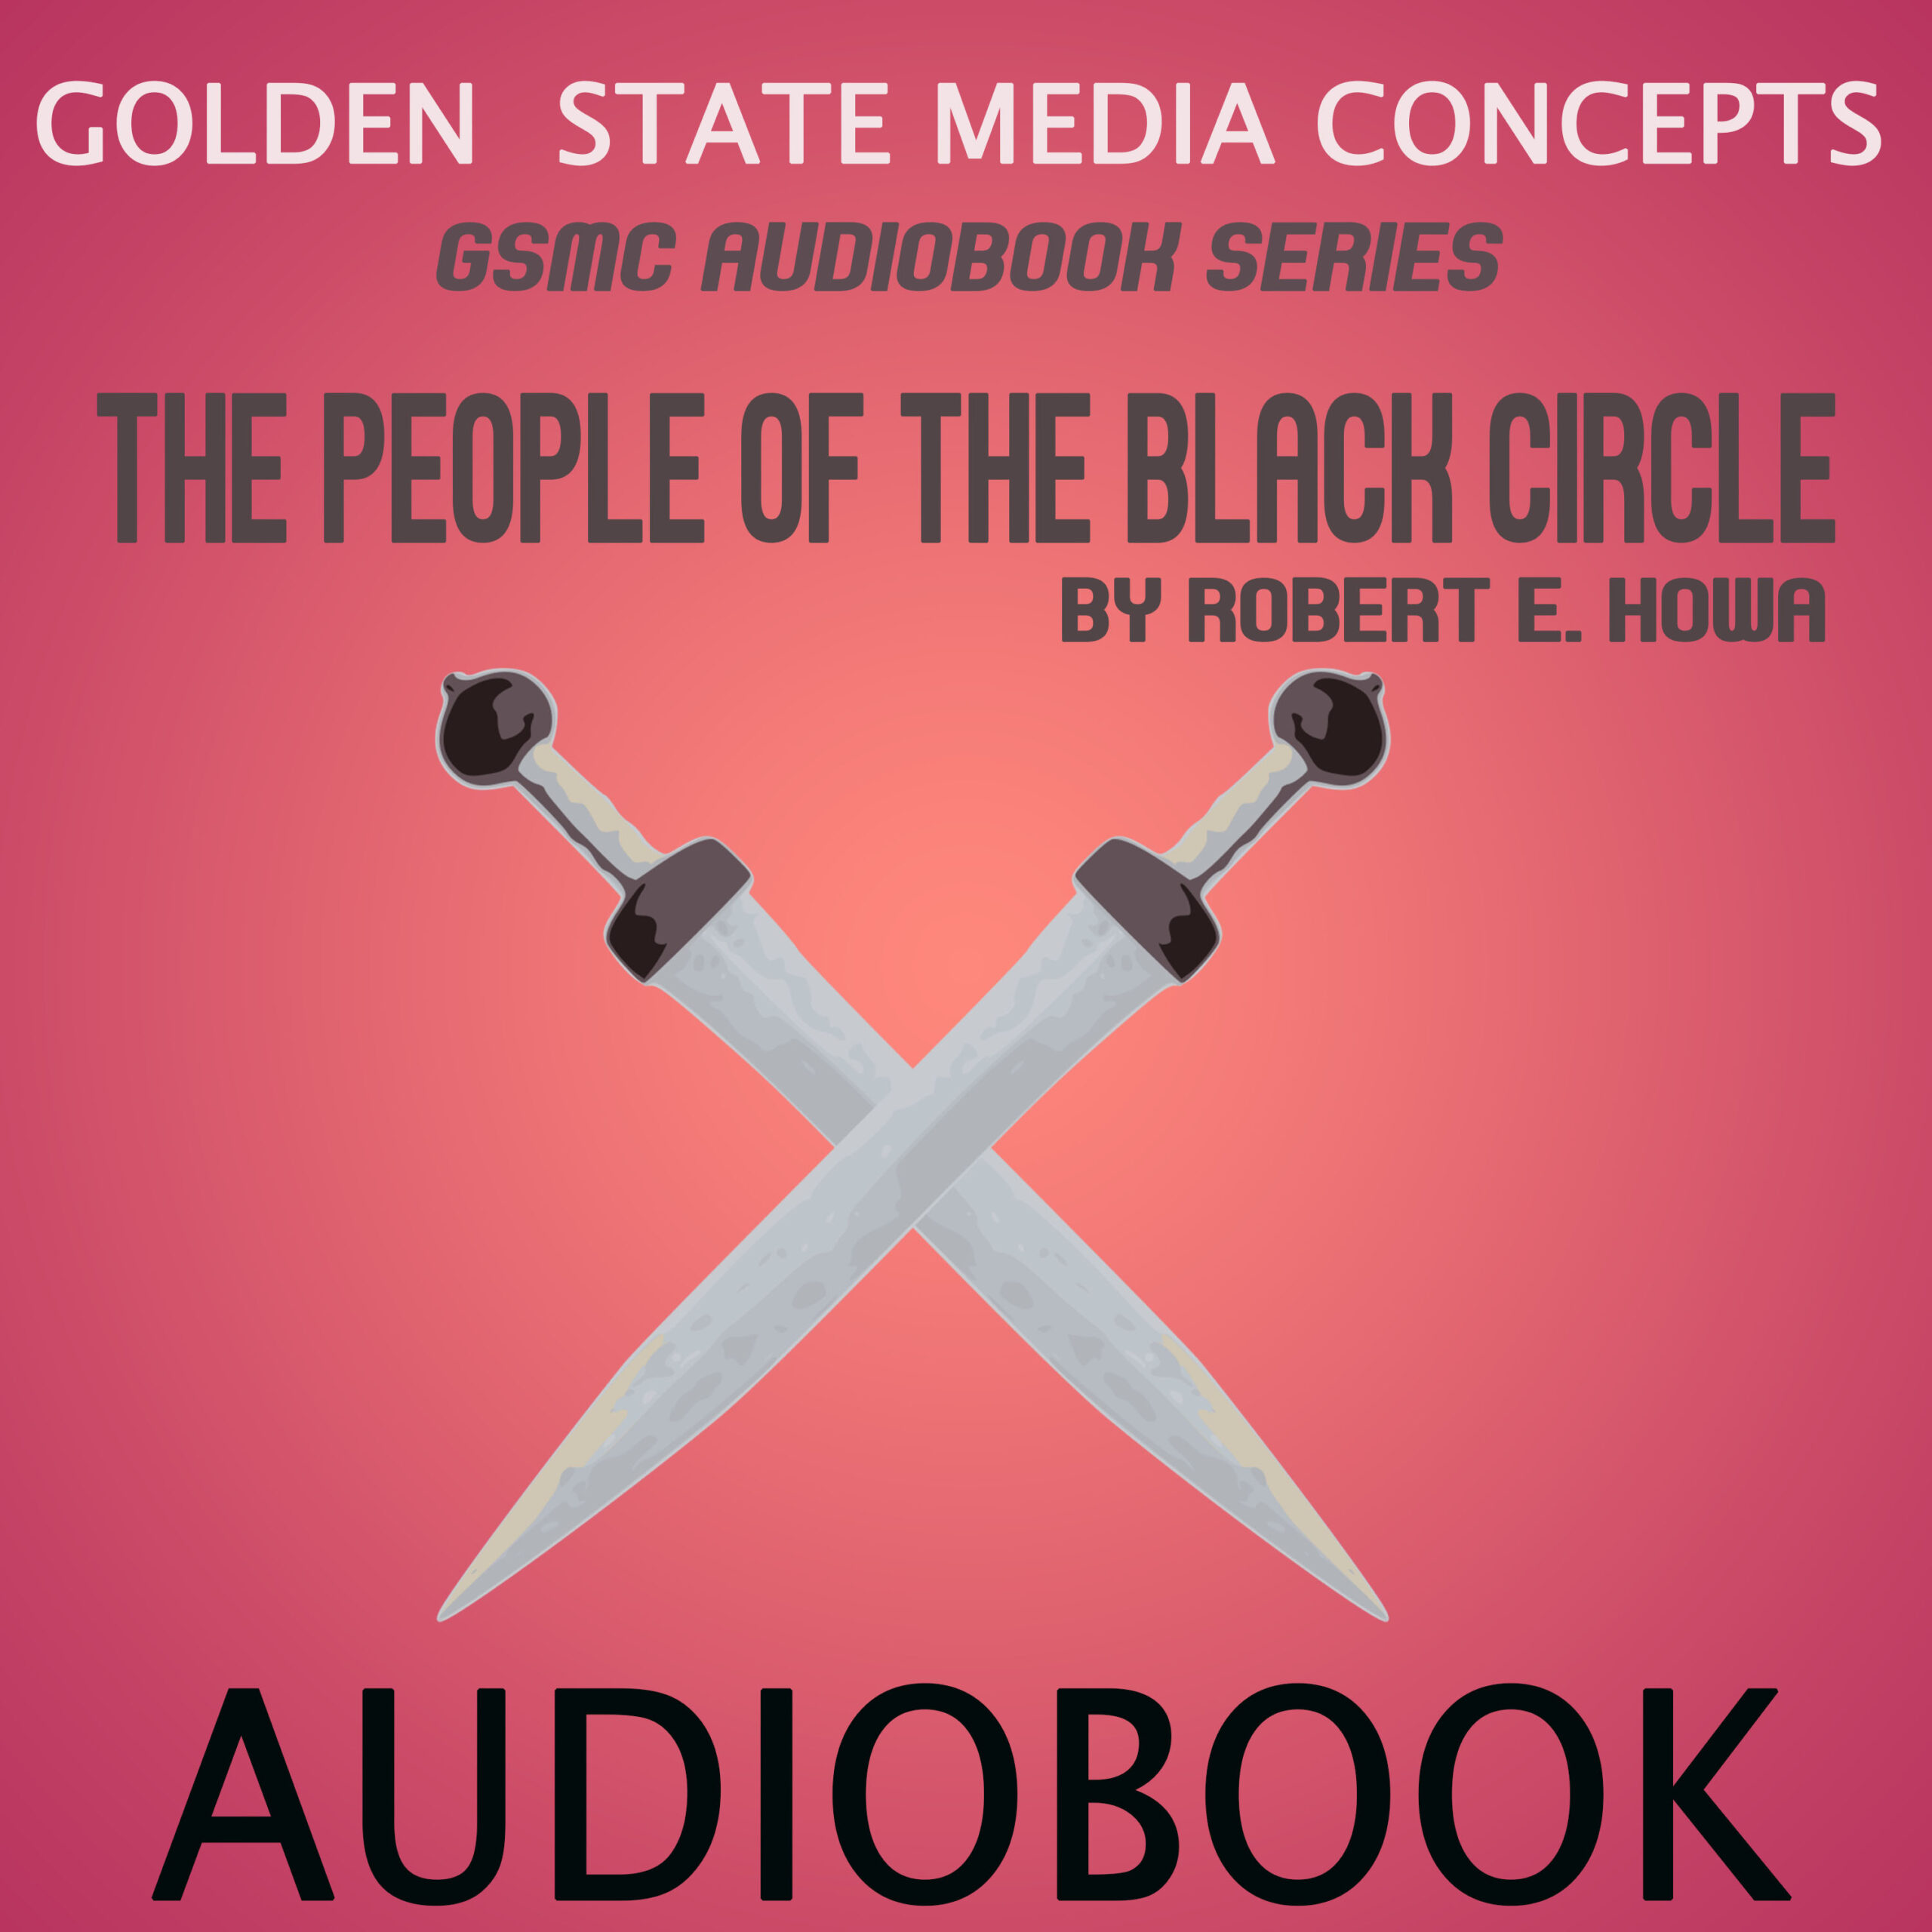 The People of the Black Circle by Robert